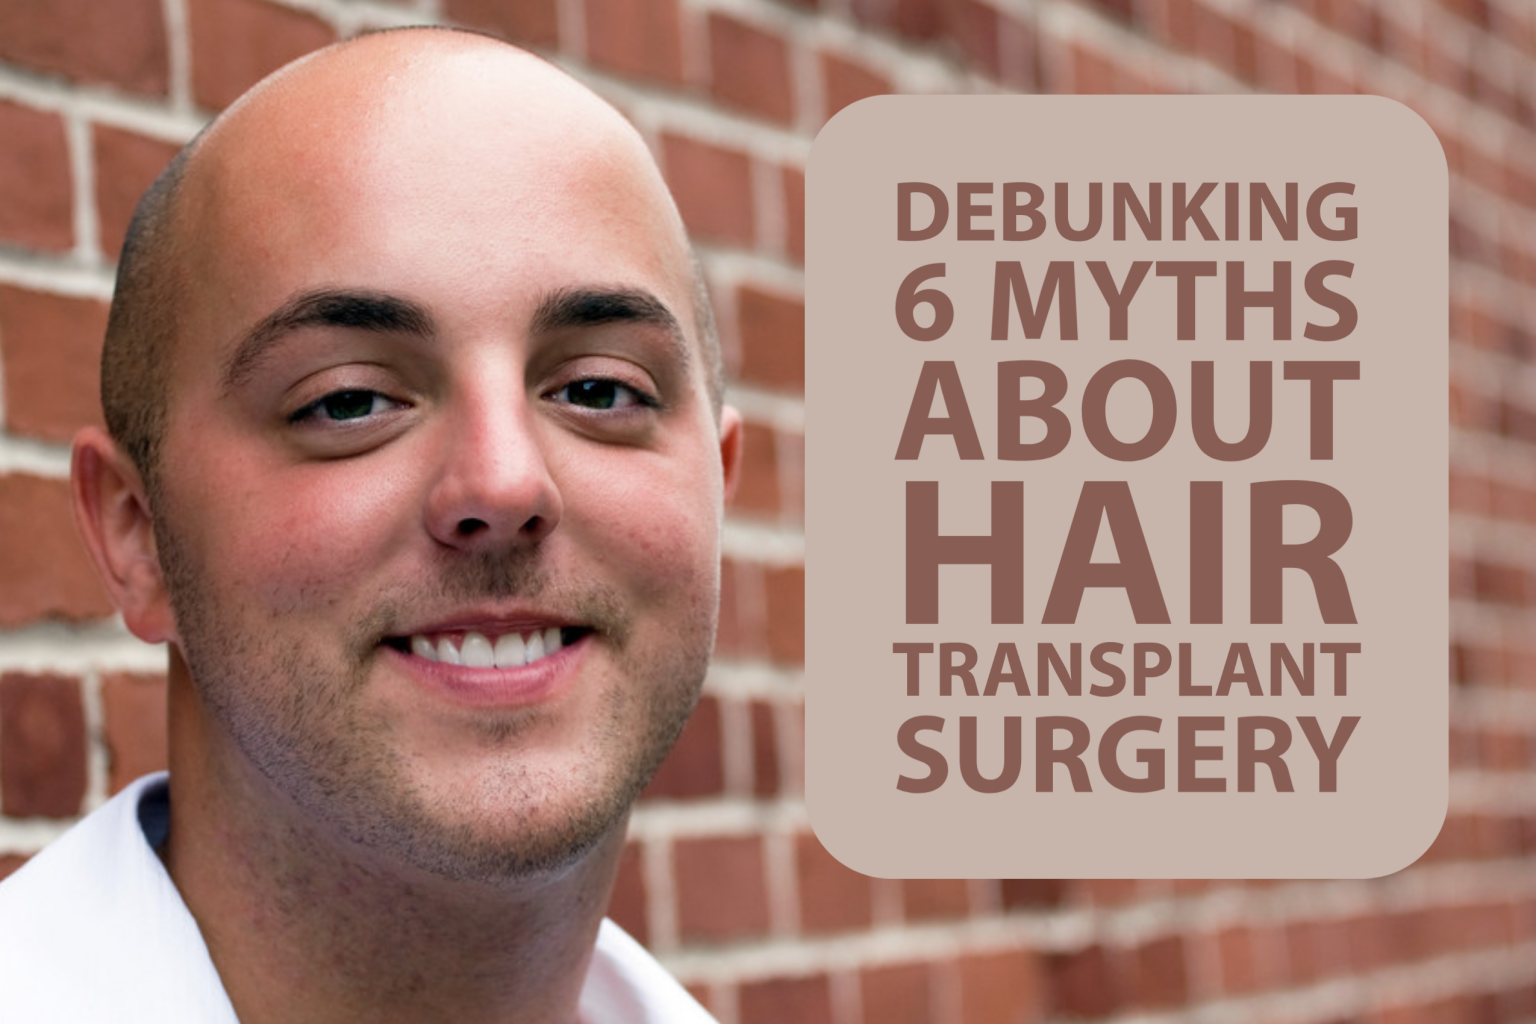 Debunking Myths About Hair Transplant Surgery